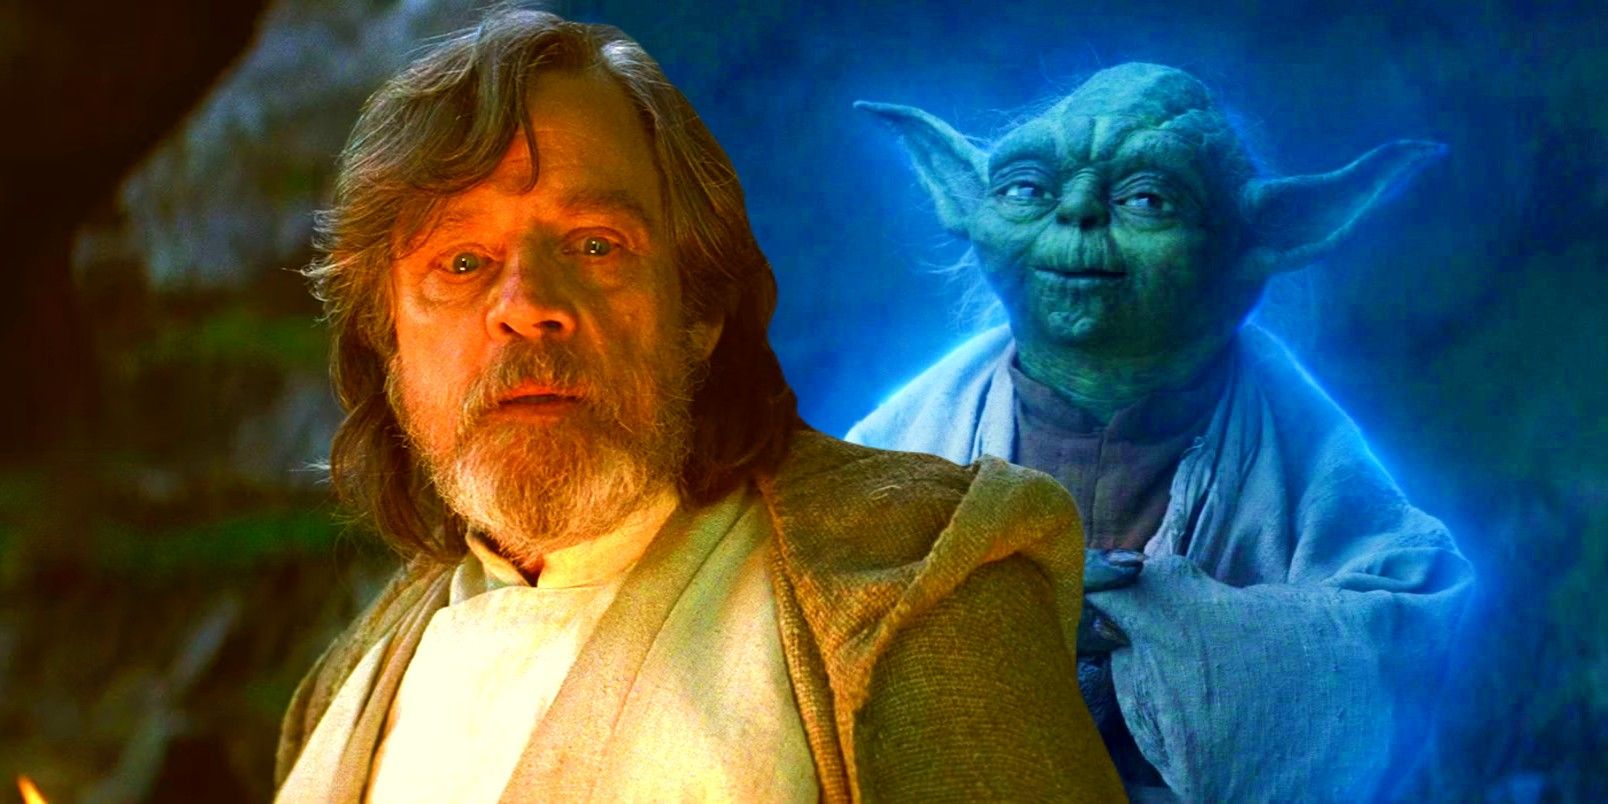 Luke Skywalker (Mark Hamill) with a horrified look on his face next to Yoda's Force ghost on Ahch-To in Star Wars: Episode VIII - The Last Jedi